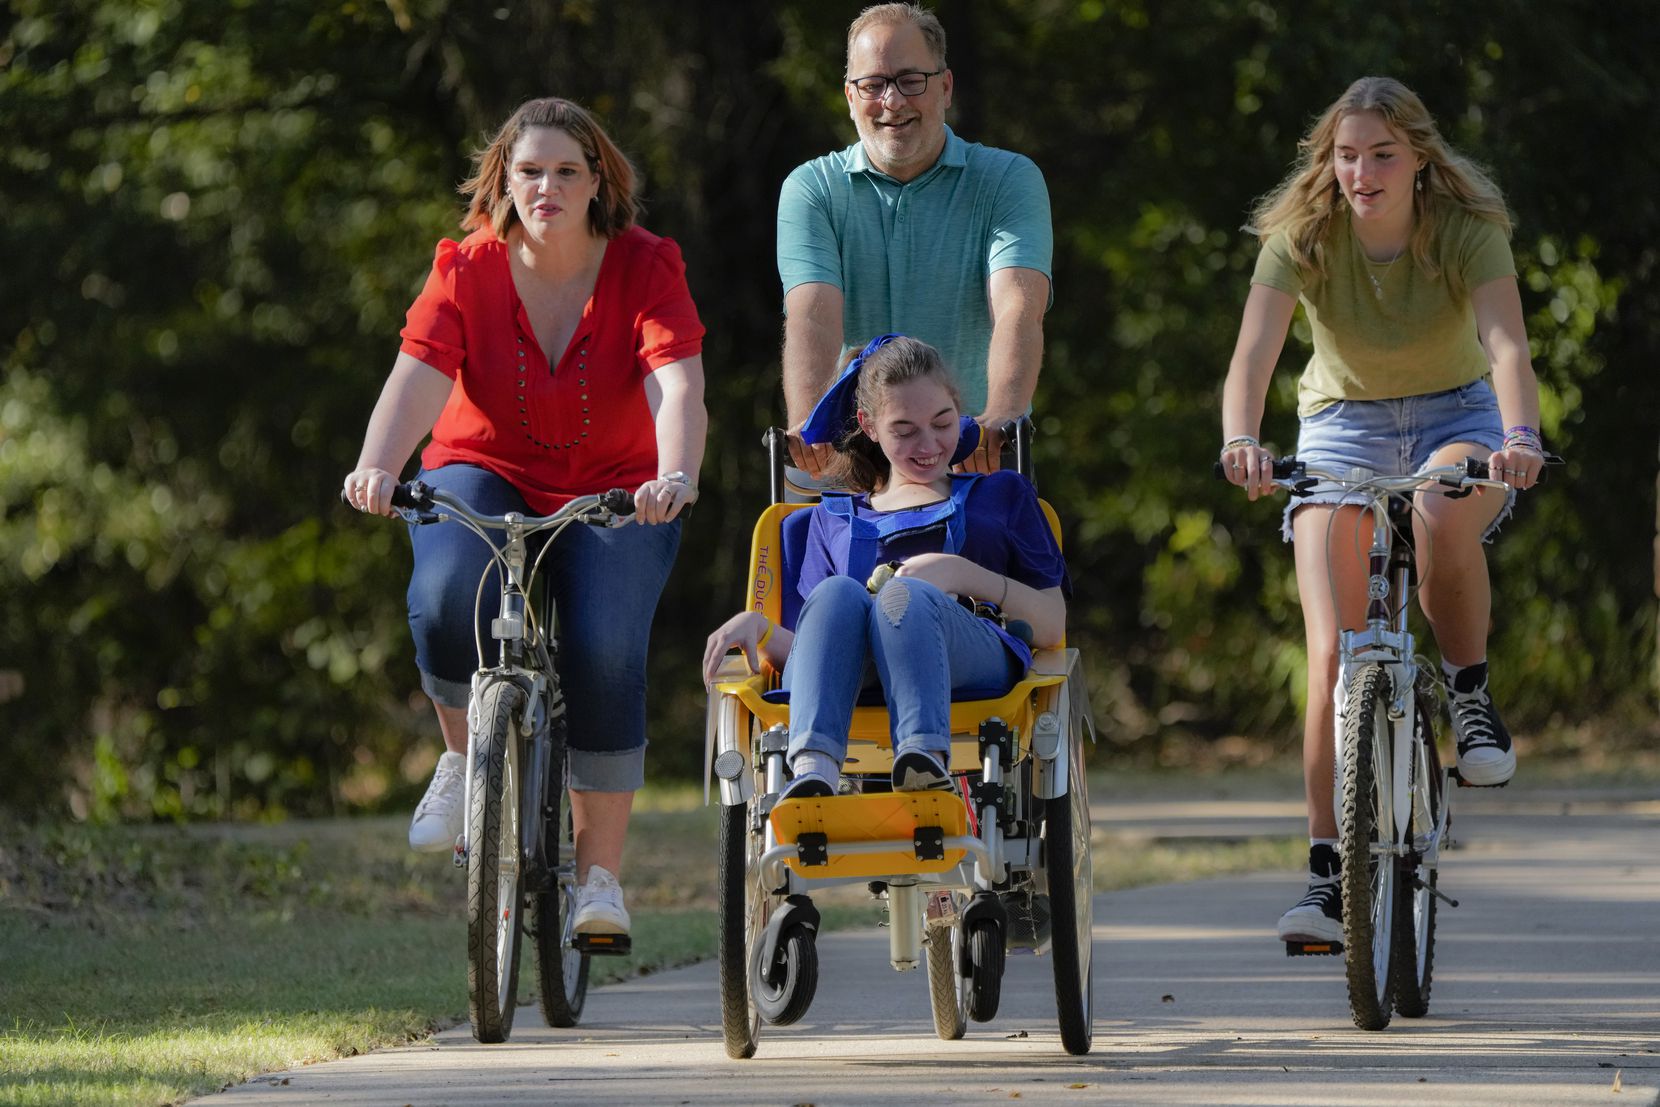 Shelby Sparks, 21, rides in a chair attached to the front of her dad's bicycle. Her father,...